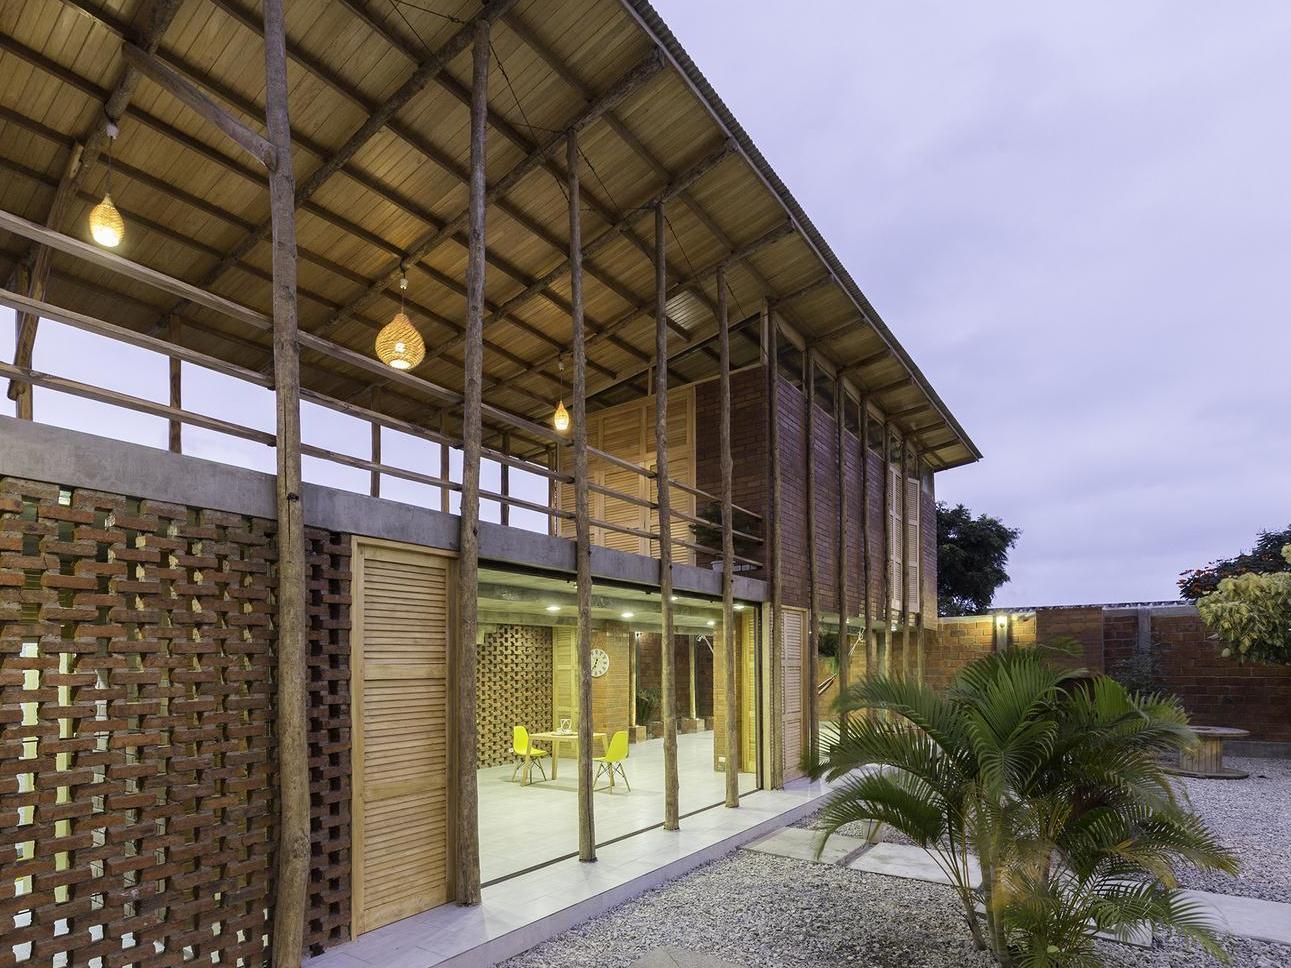 The architects chose not to use any glass in the home, instead incorporating traditional elements such as wooden slat walls that allow ventilation